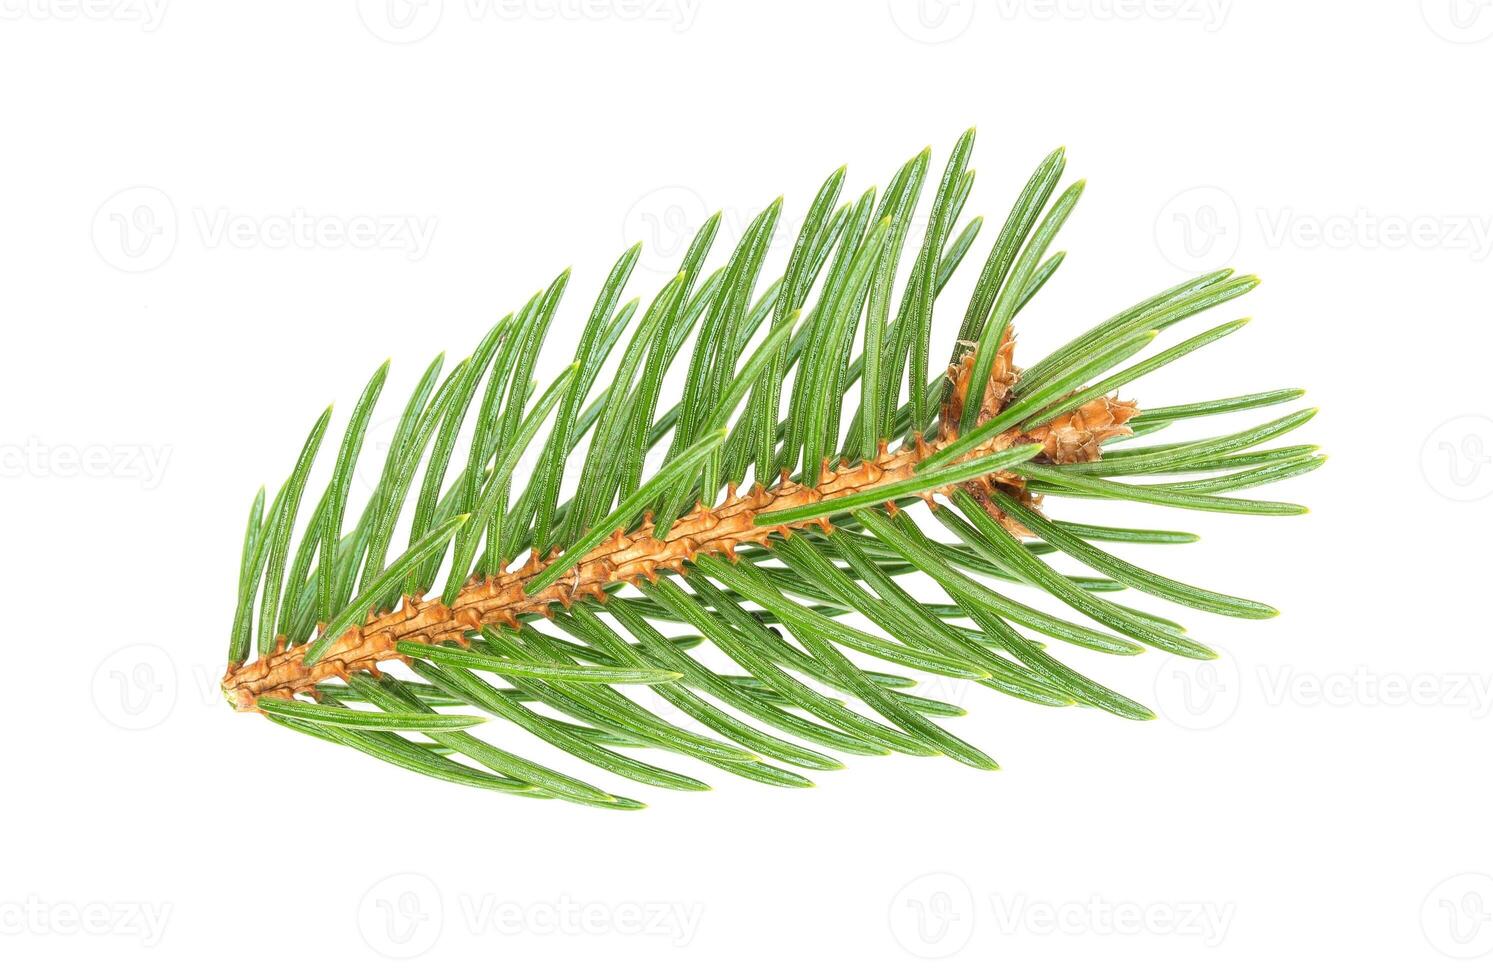 Fir tree branch isolated on white background photo